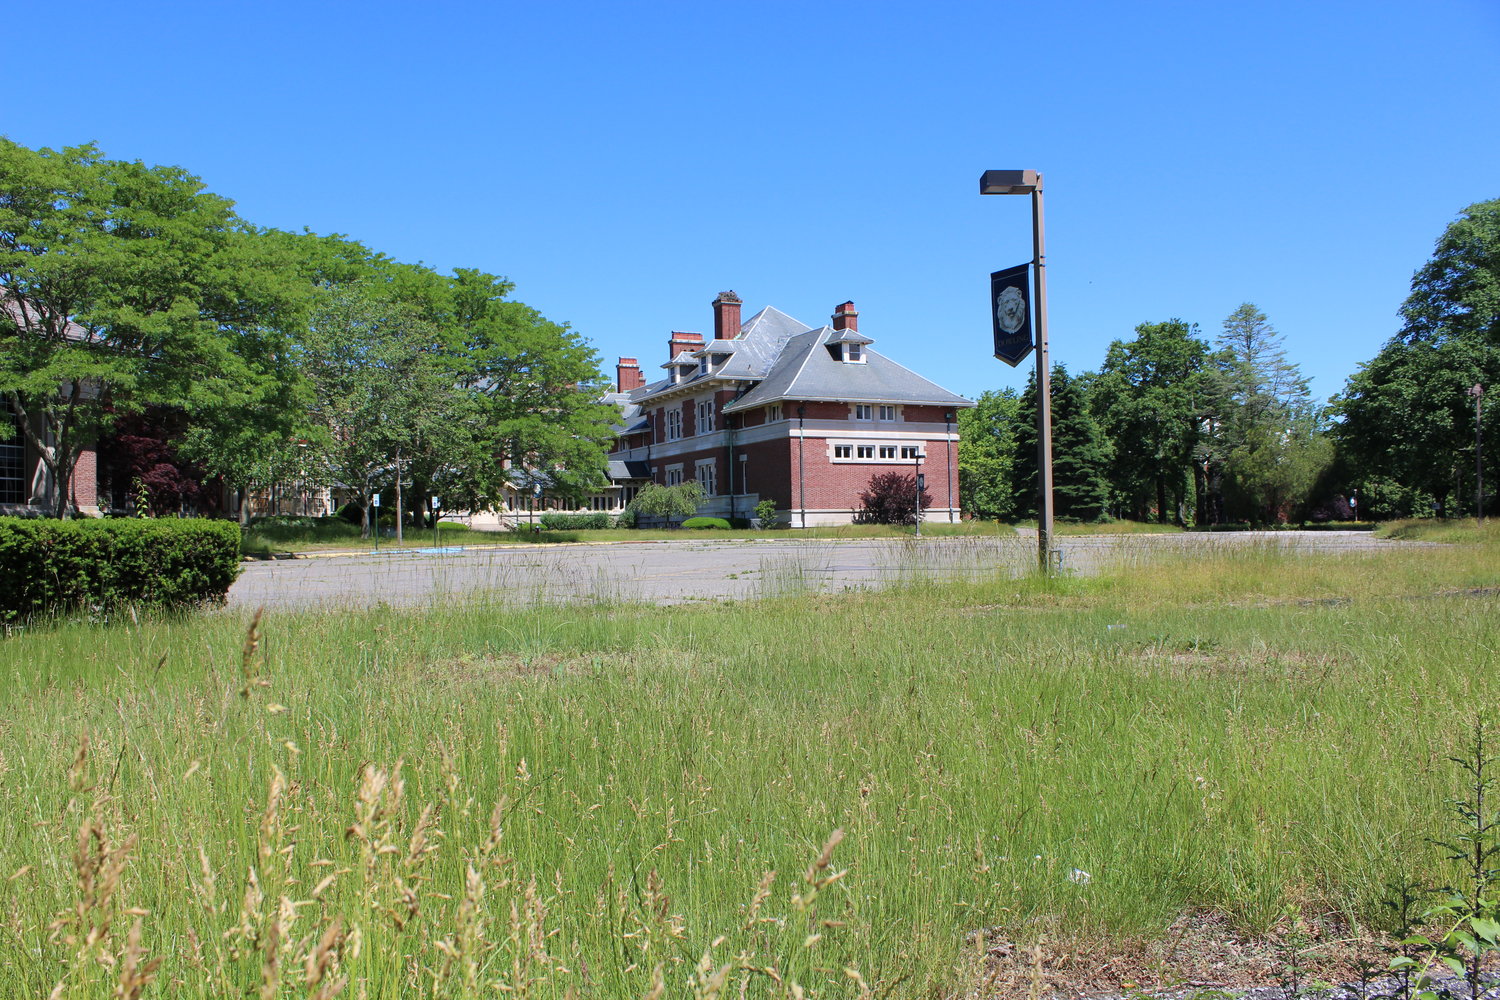 The Vanderbilt estate and other buildings on the 25-acre former Dowling College campus are still empty; grass is not mowed and residents report vandalism, fires and graffiti.